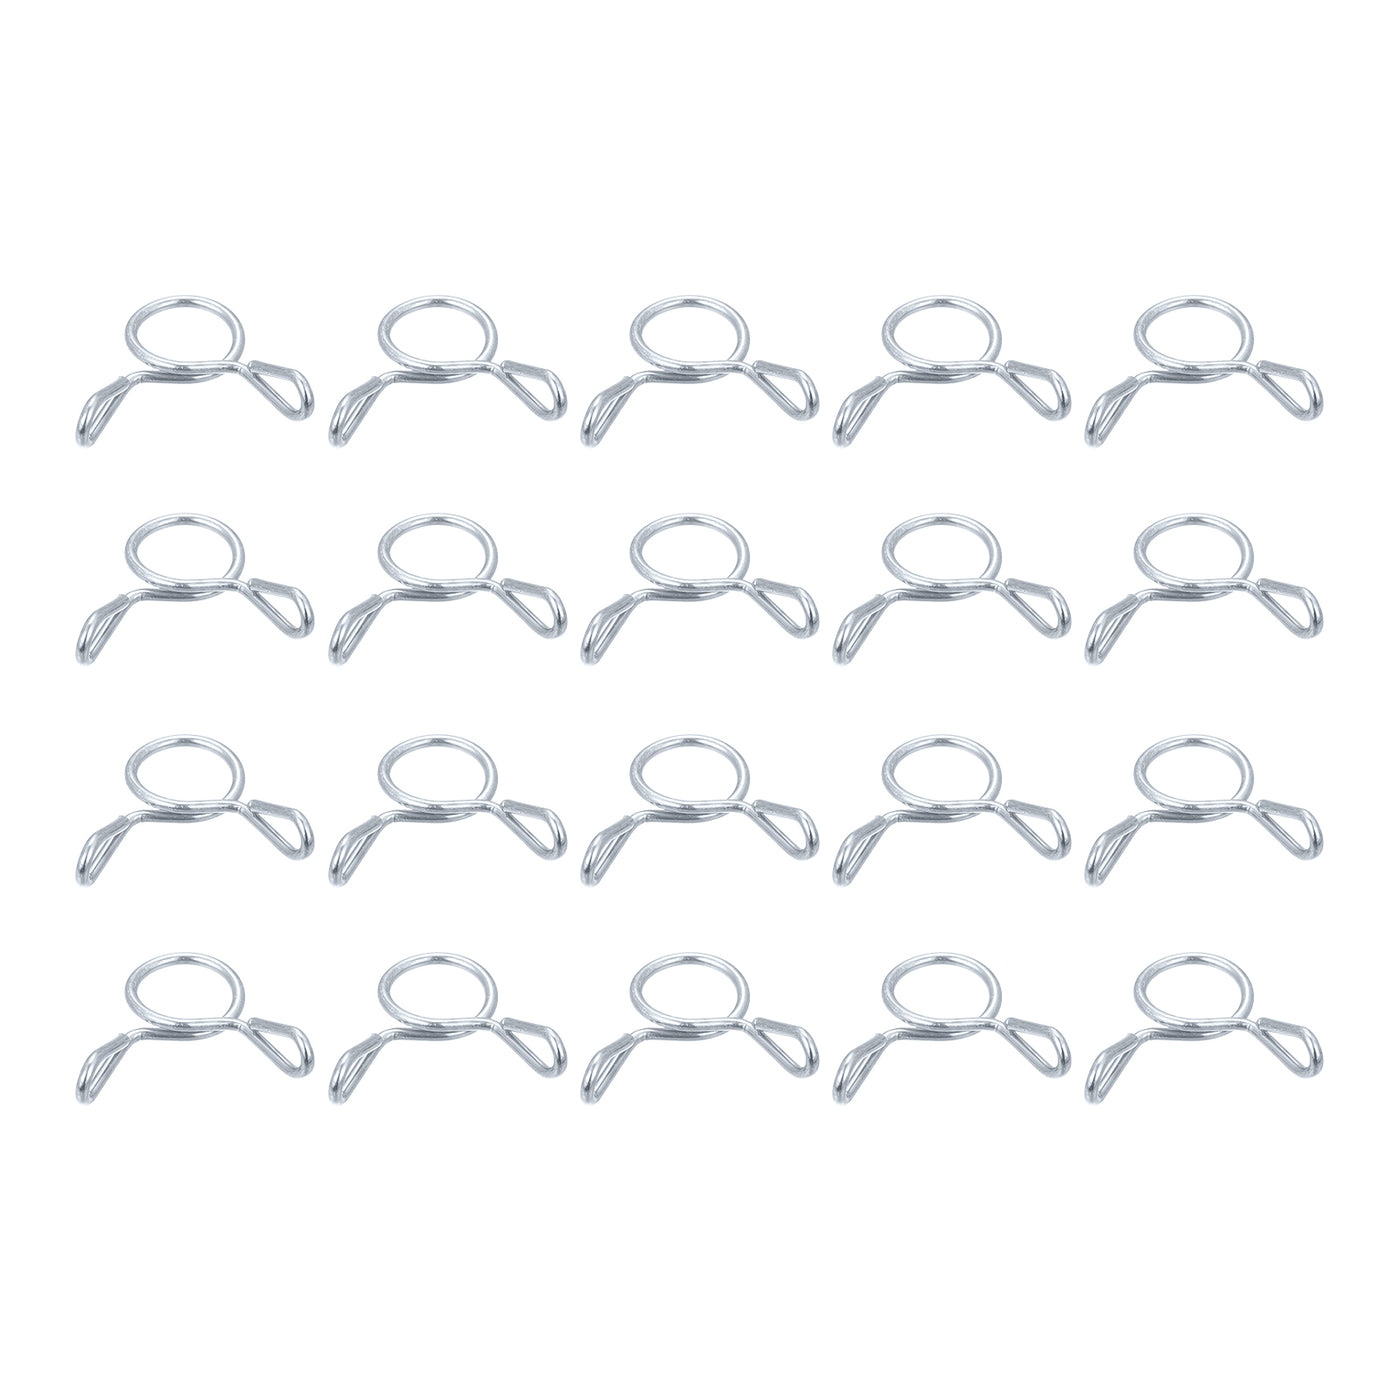 Uxcell Uxcell Fuel Line Hose Clips, 20pcs 13mm 65Mn Steel Tubing Spring Clamps (Silver)